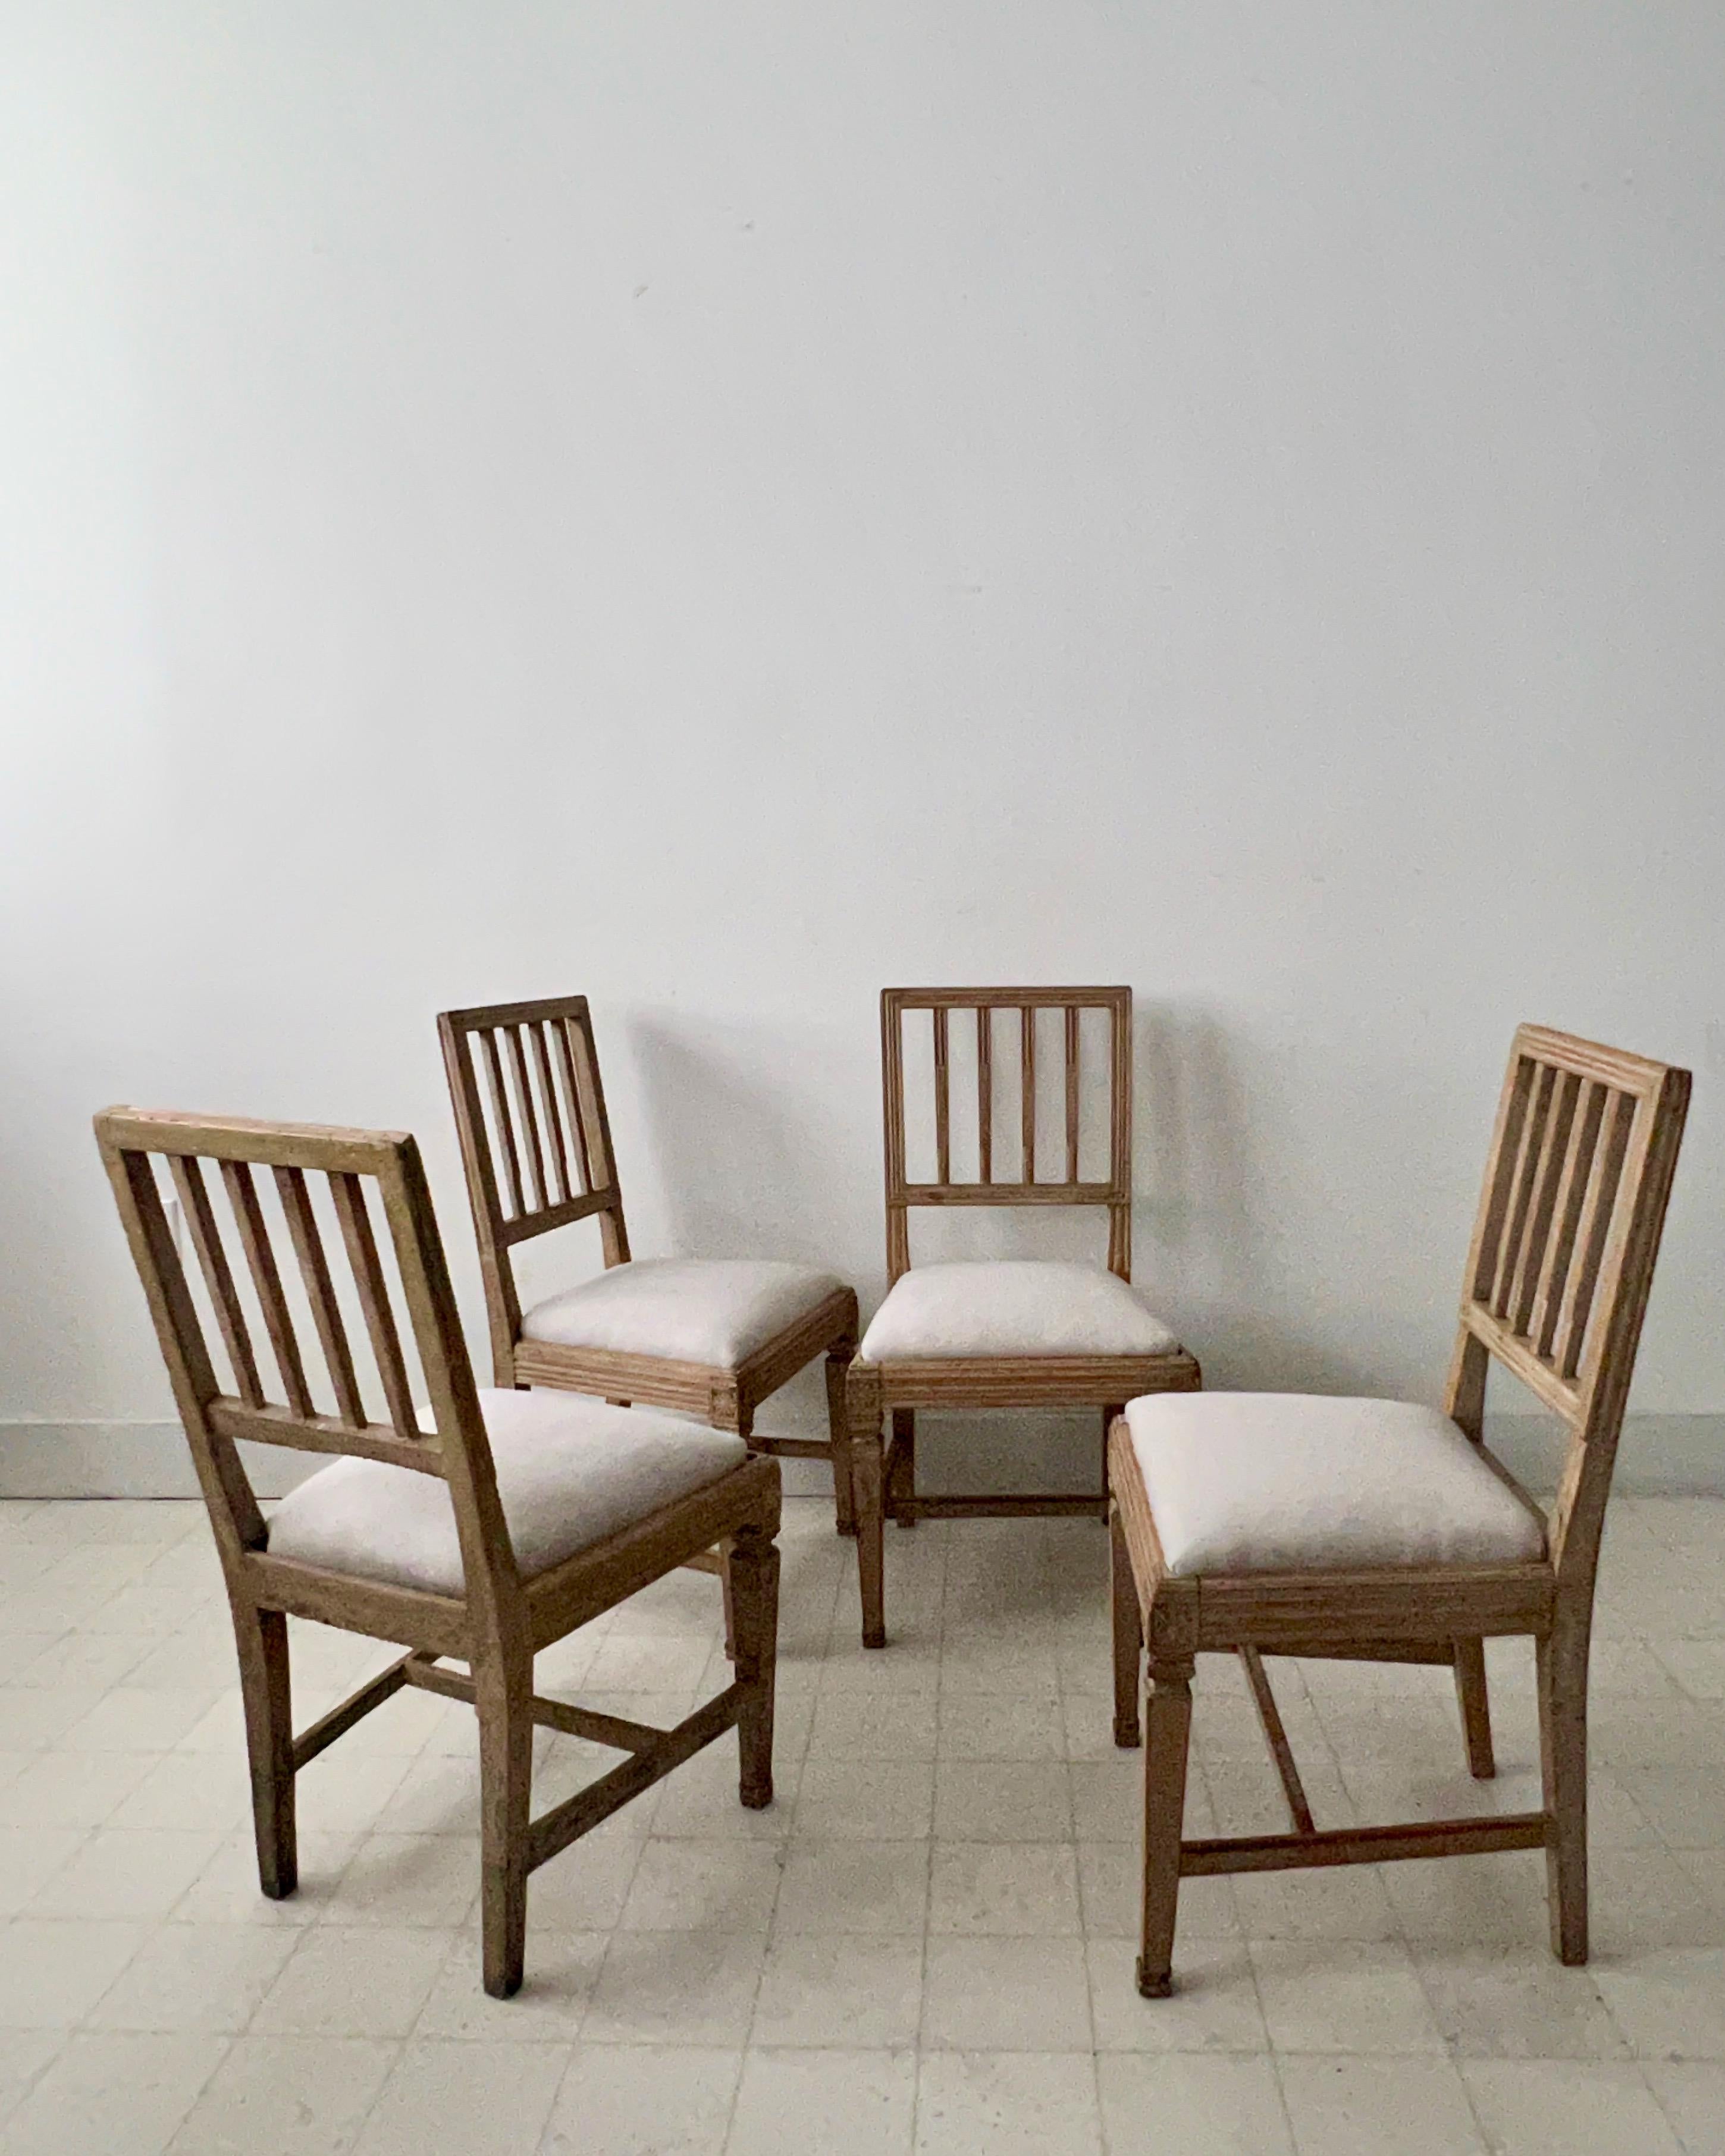 Family of four 18th century Gustavian period folk art chairs, Leksand model, with original patina and re-covered cushions in linen.
Note: One chair slightly different- please see the additional photos
Set of chairs made during the Gustavian period